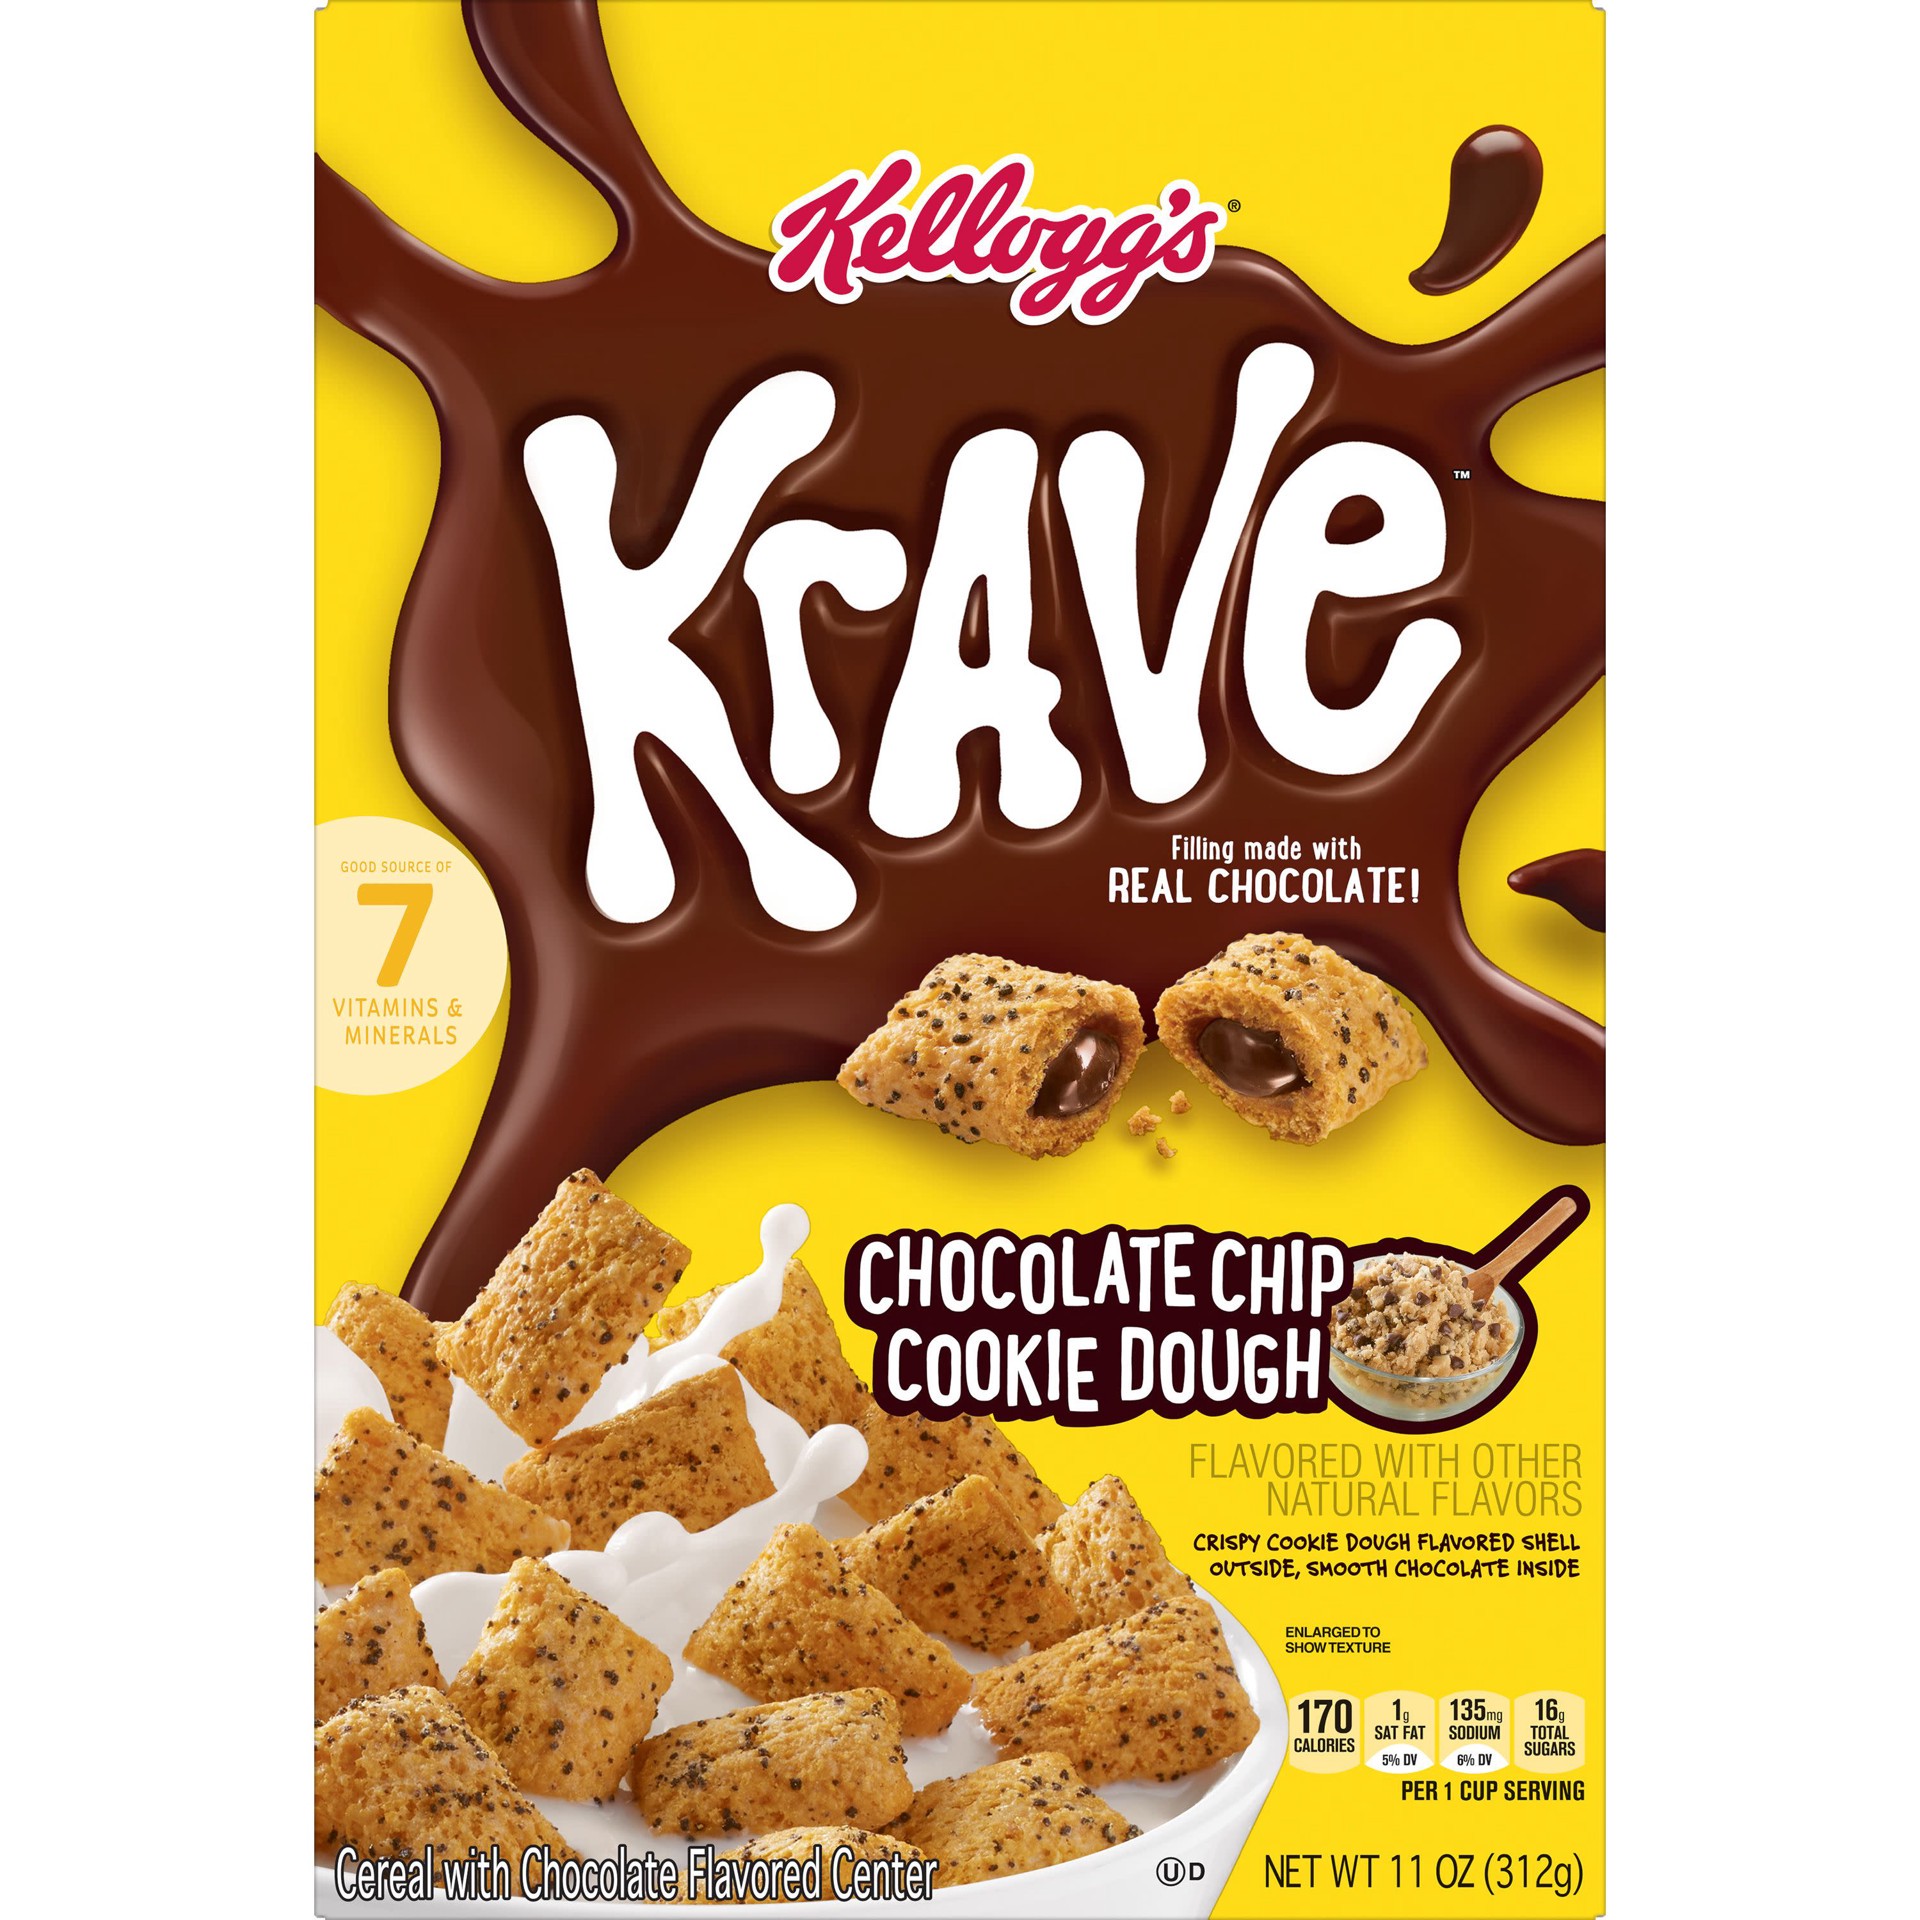 slide 3 of 5, Krave Kellogg's Krave Breakfast Cereal, 7 Vitamins and Minerals, Kids Snacks, Chocolate Chip Cookie Dough, 11oz Box, 1 Box, 11 oz